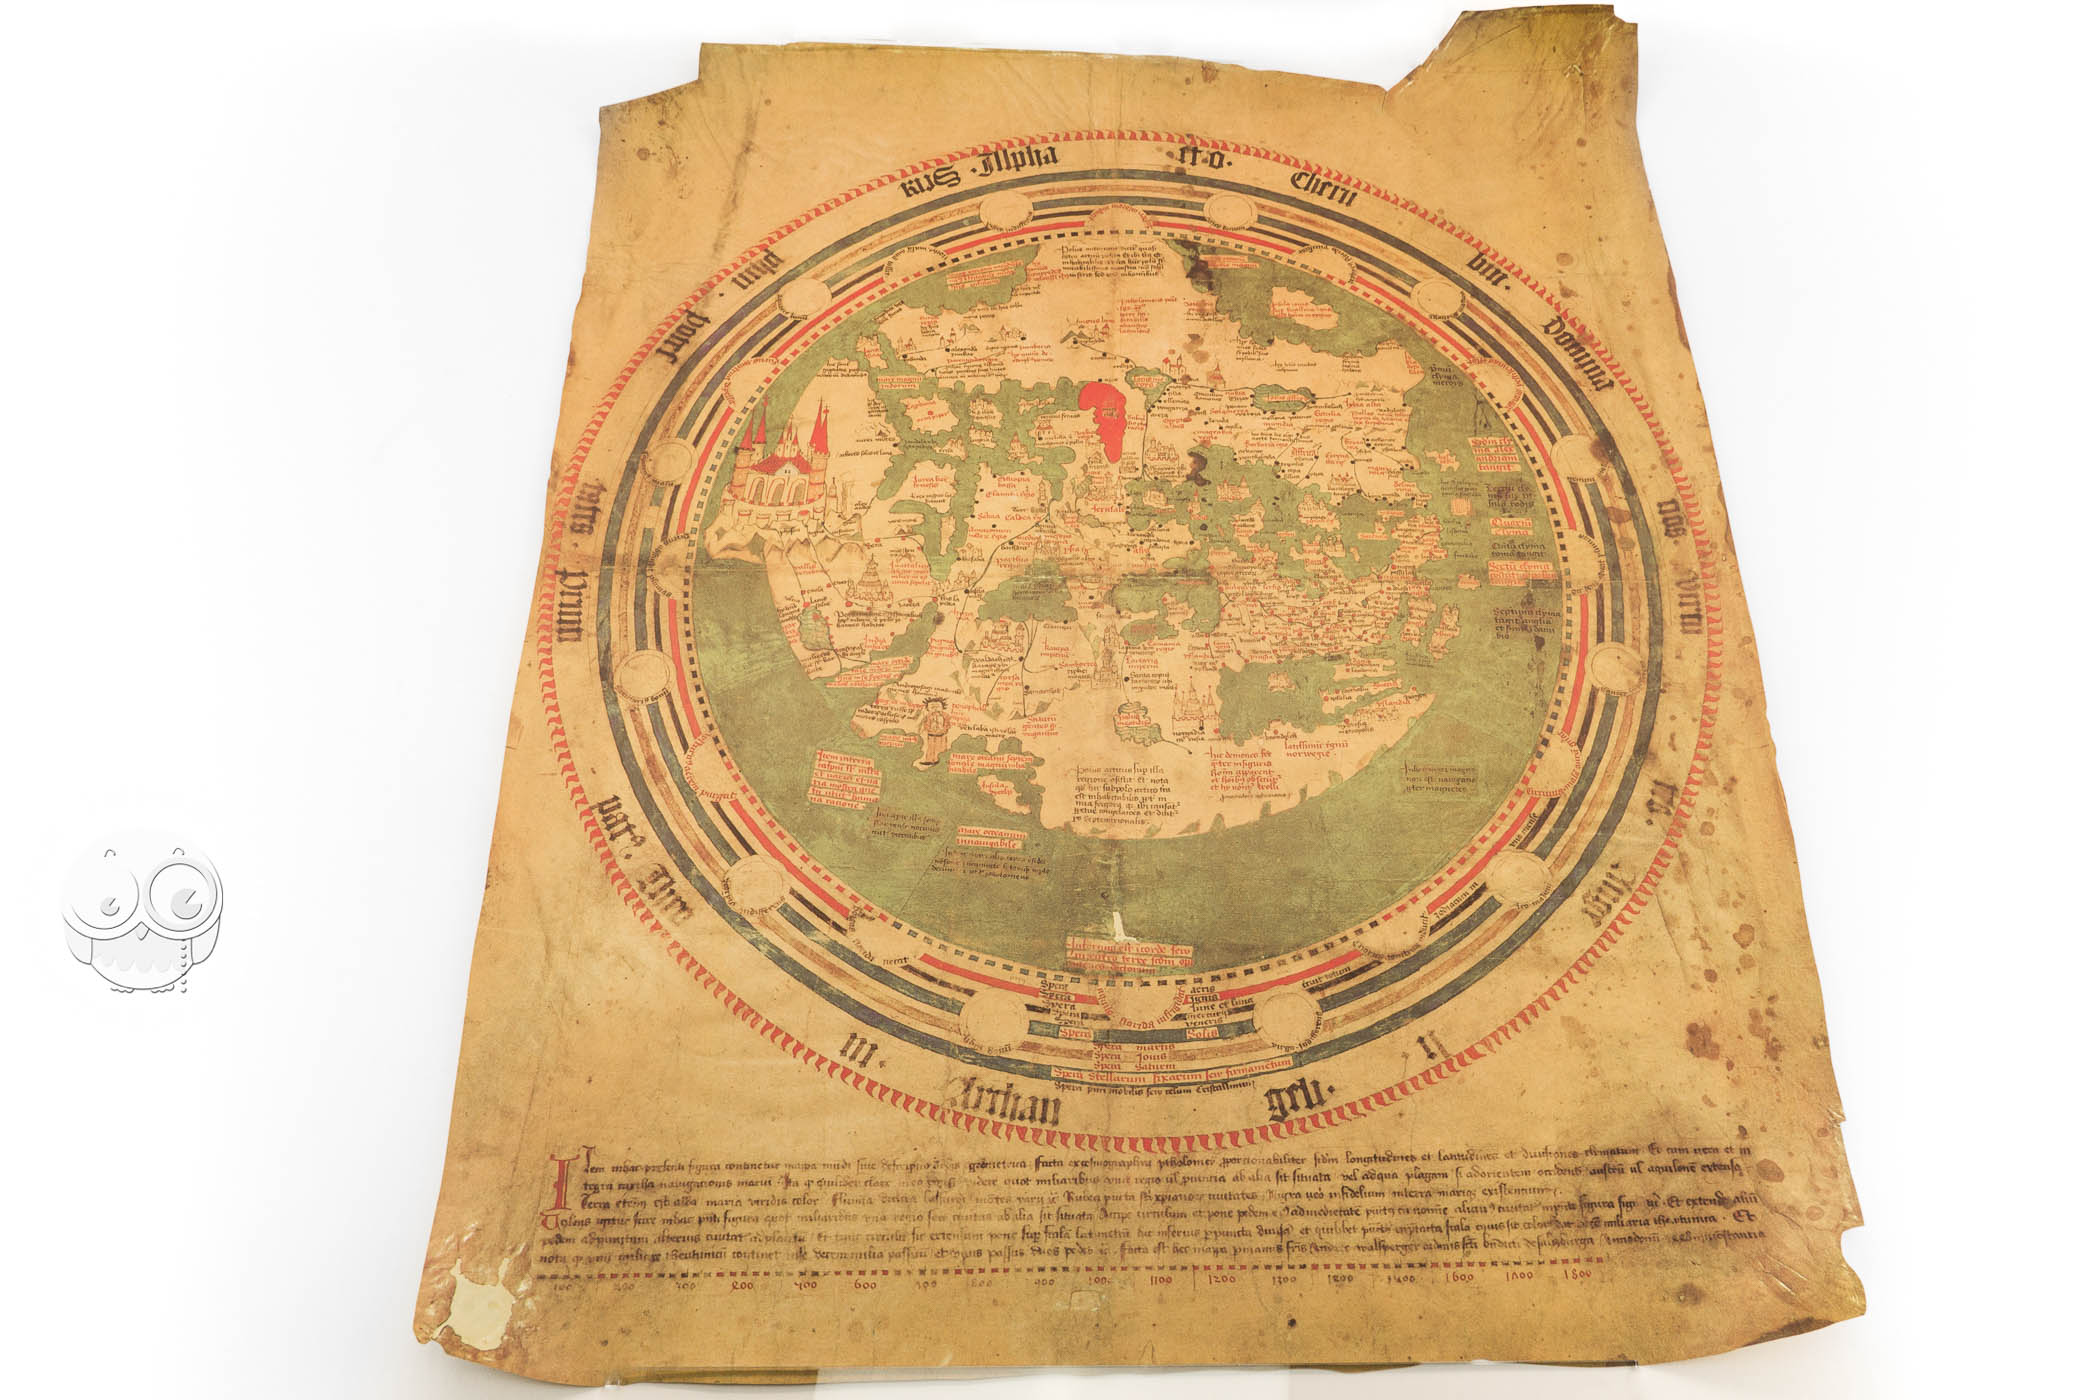 Mapa Mundi contemplating the three countries depicted in this work: A